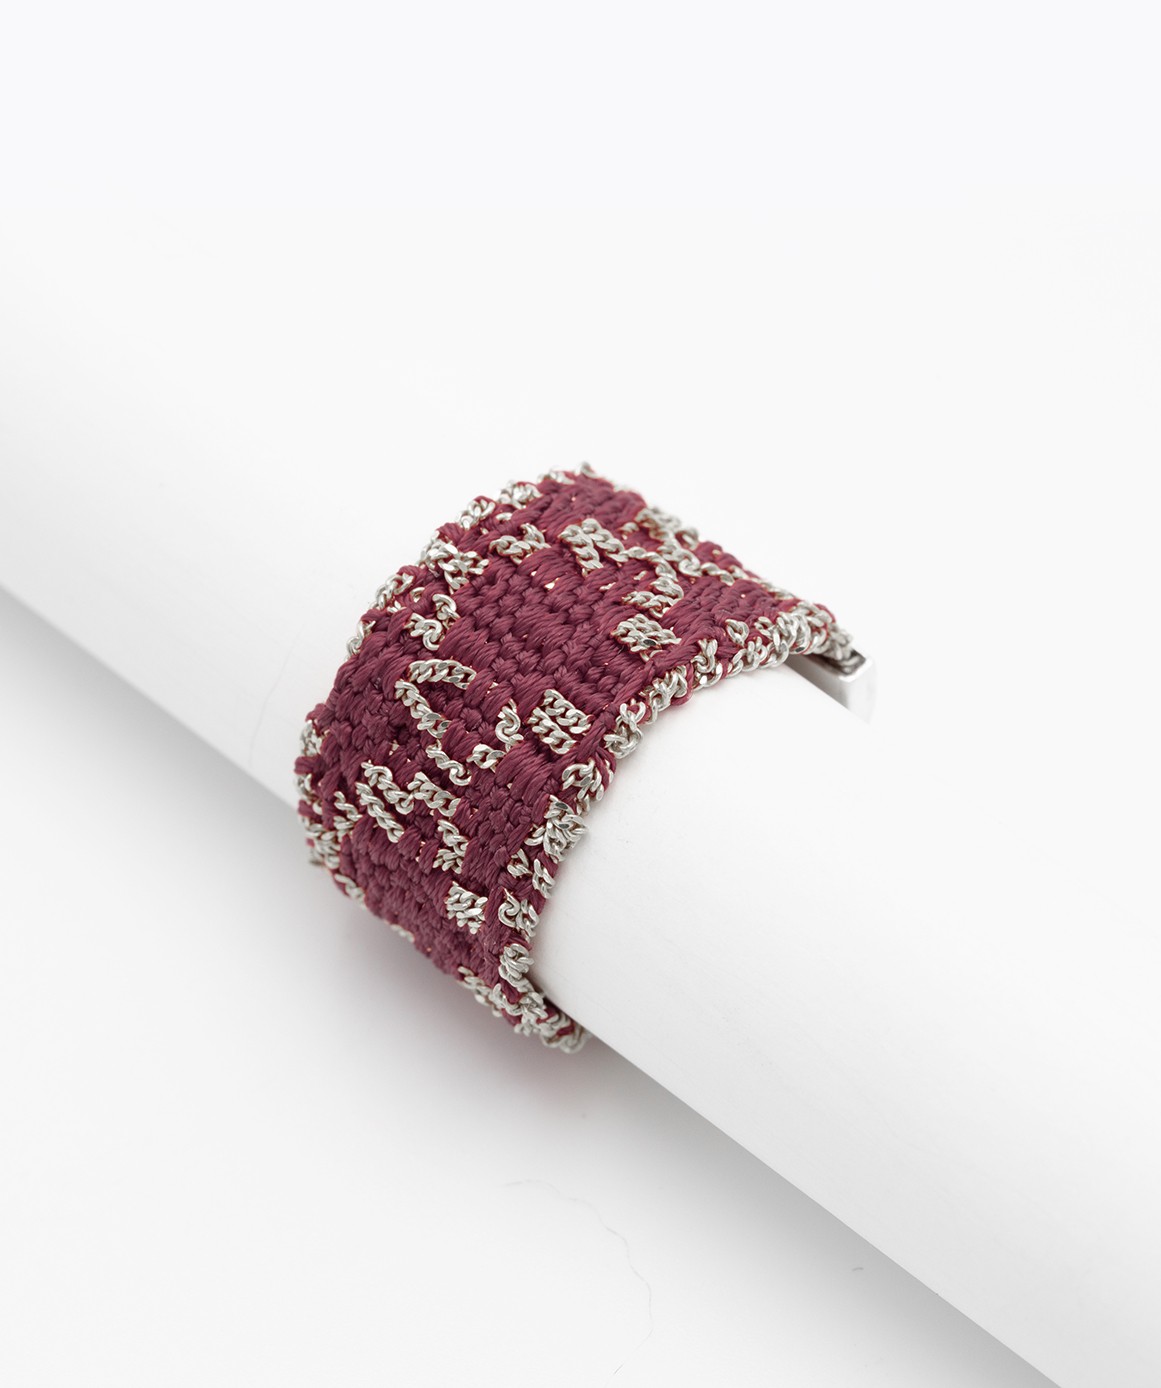 RHOMBUS Ring in Sterling Silver Rhodium plated. Fabric: Bordeaux